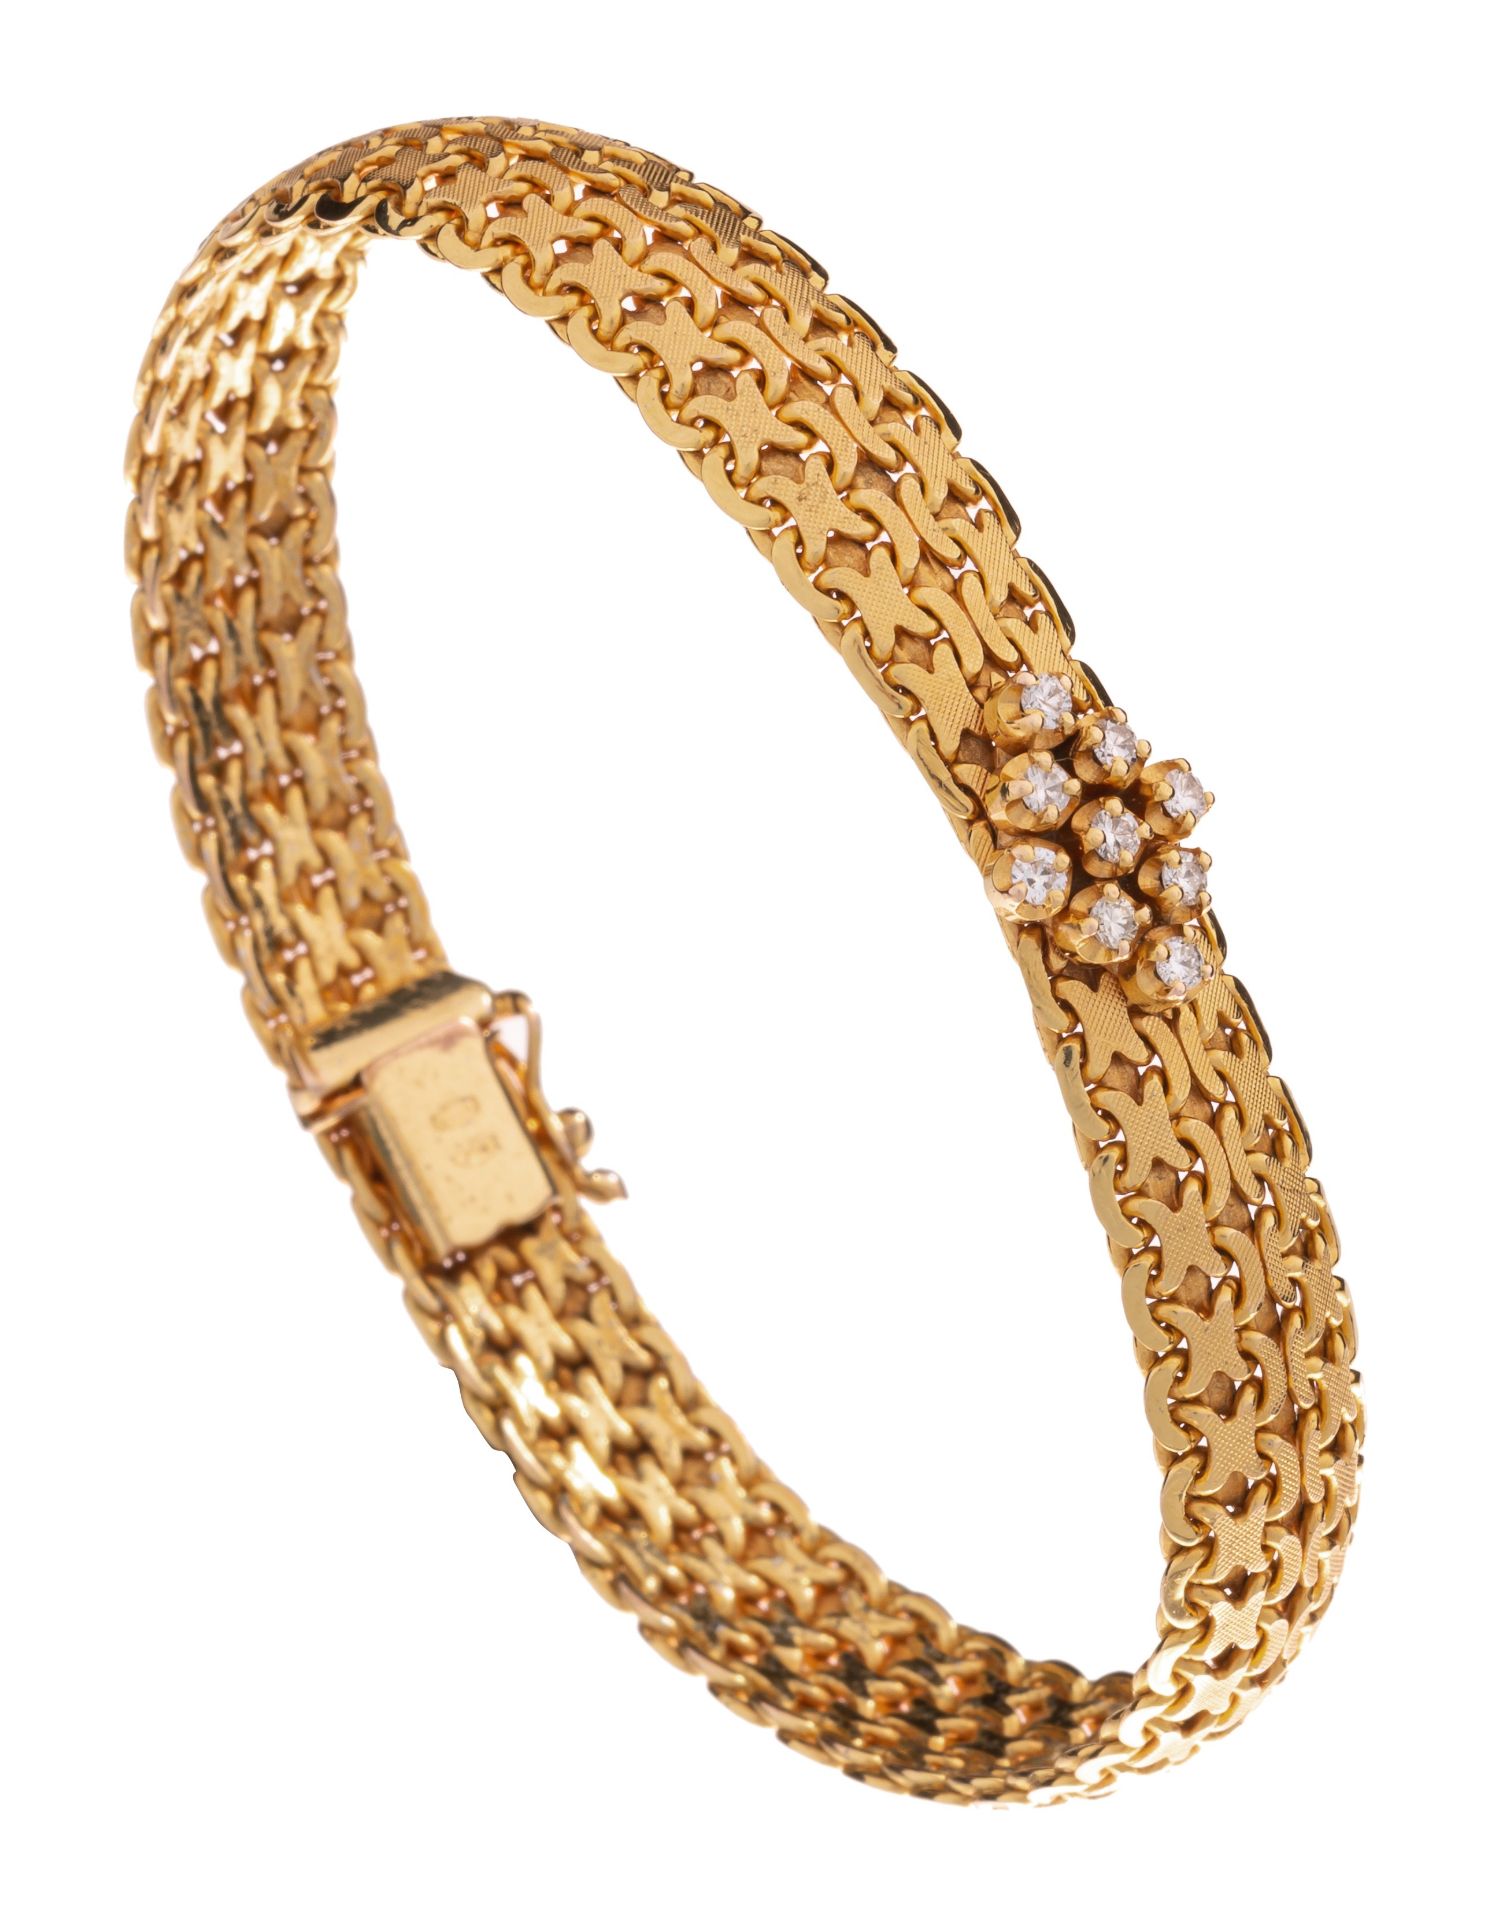 A braided bracelet in 18ct yellow gold, set with nine brilliant cut diamonds, 28,9 g